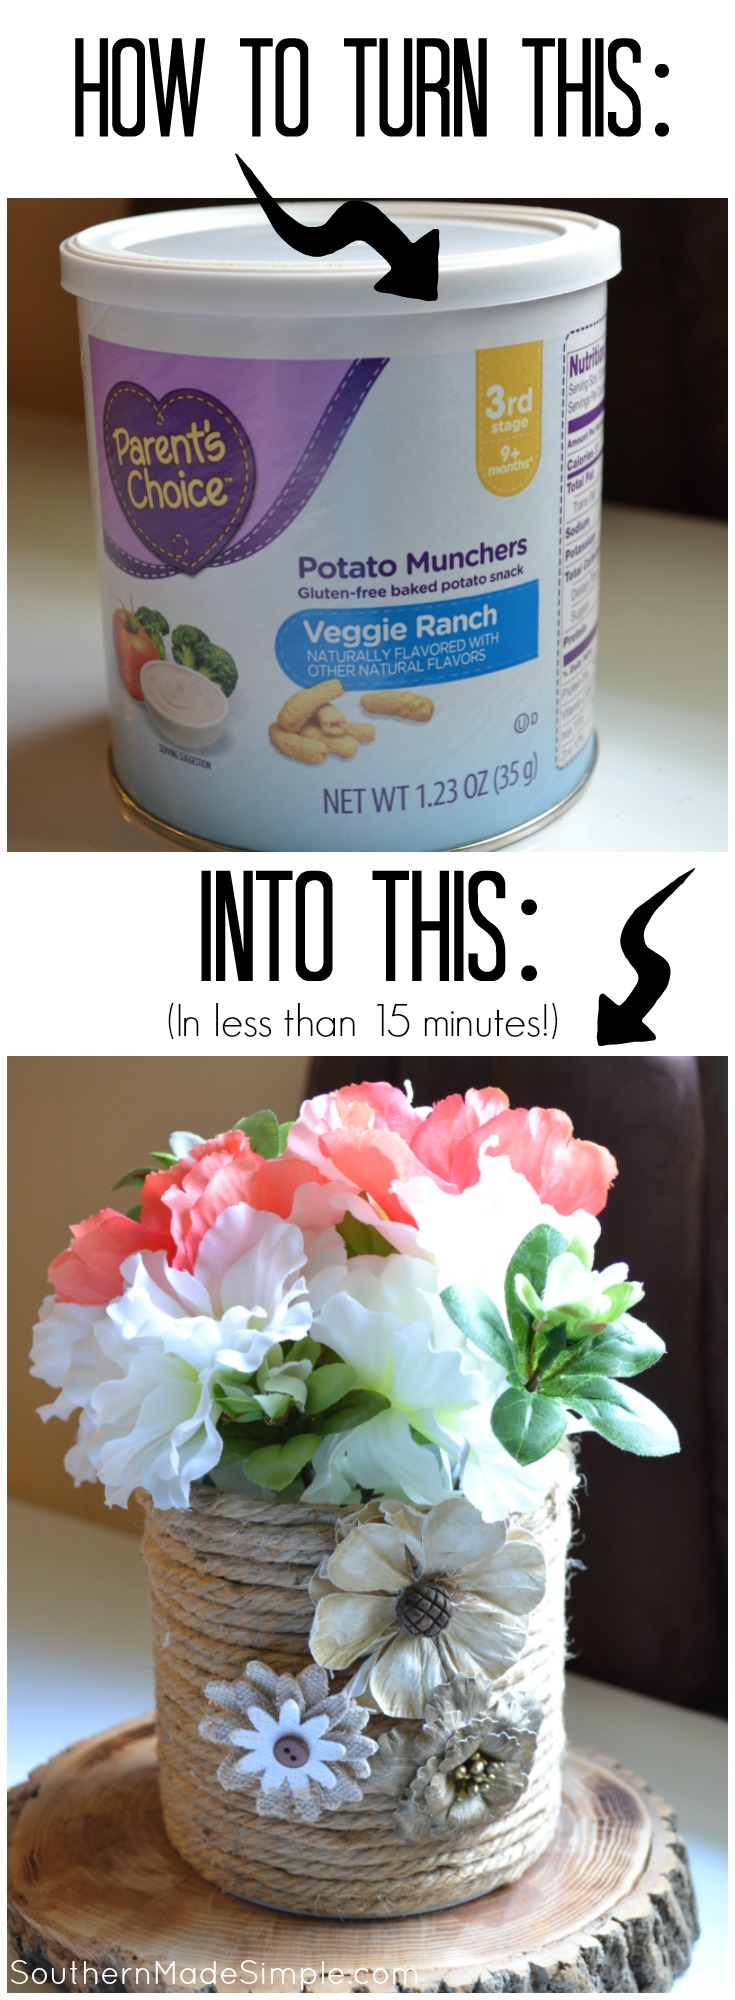 Turn old formula cans into something really great - and in less than 15 minutes! A great way to recycle and repurpose every day items in our life!